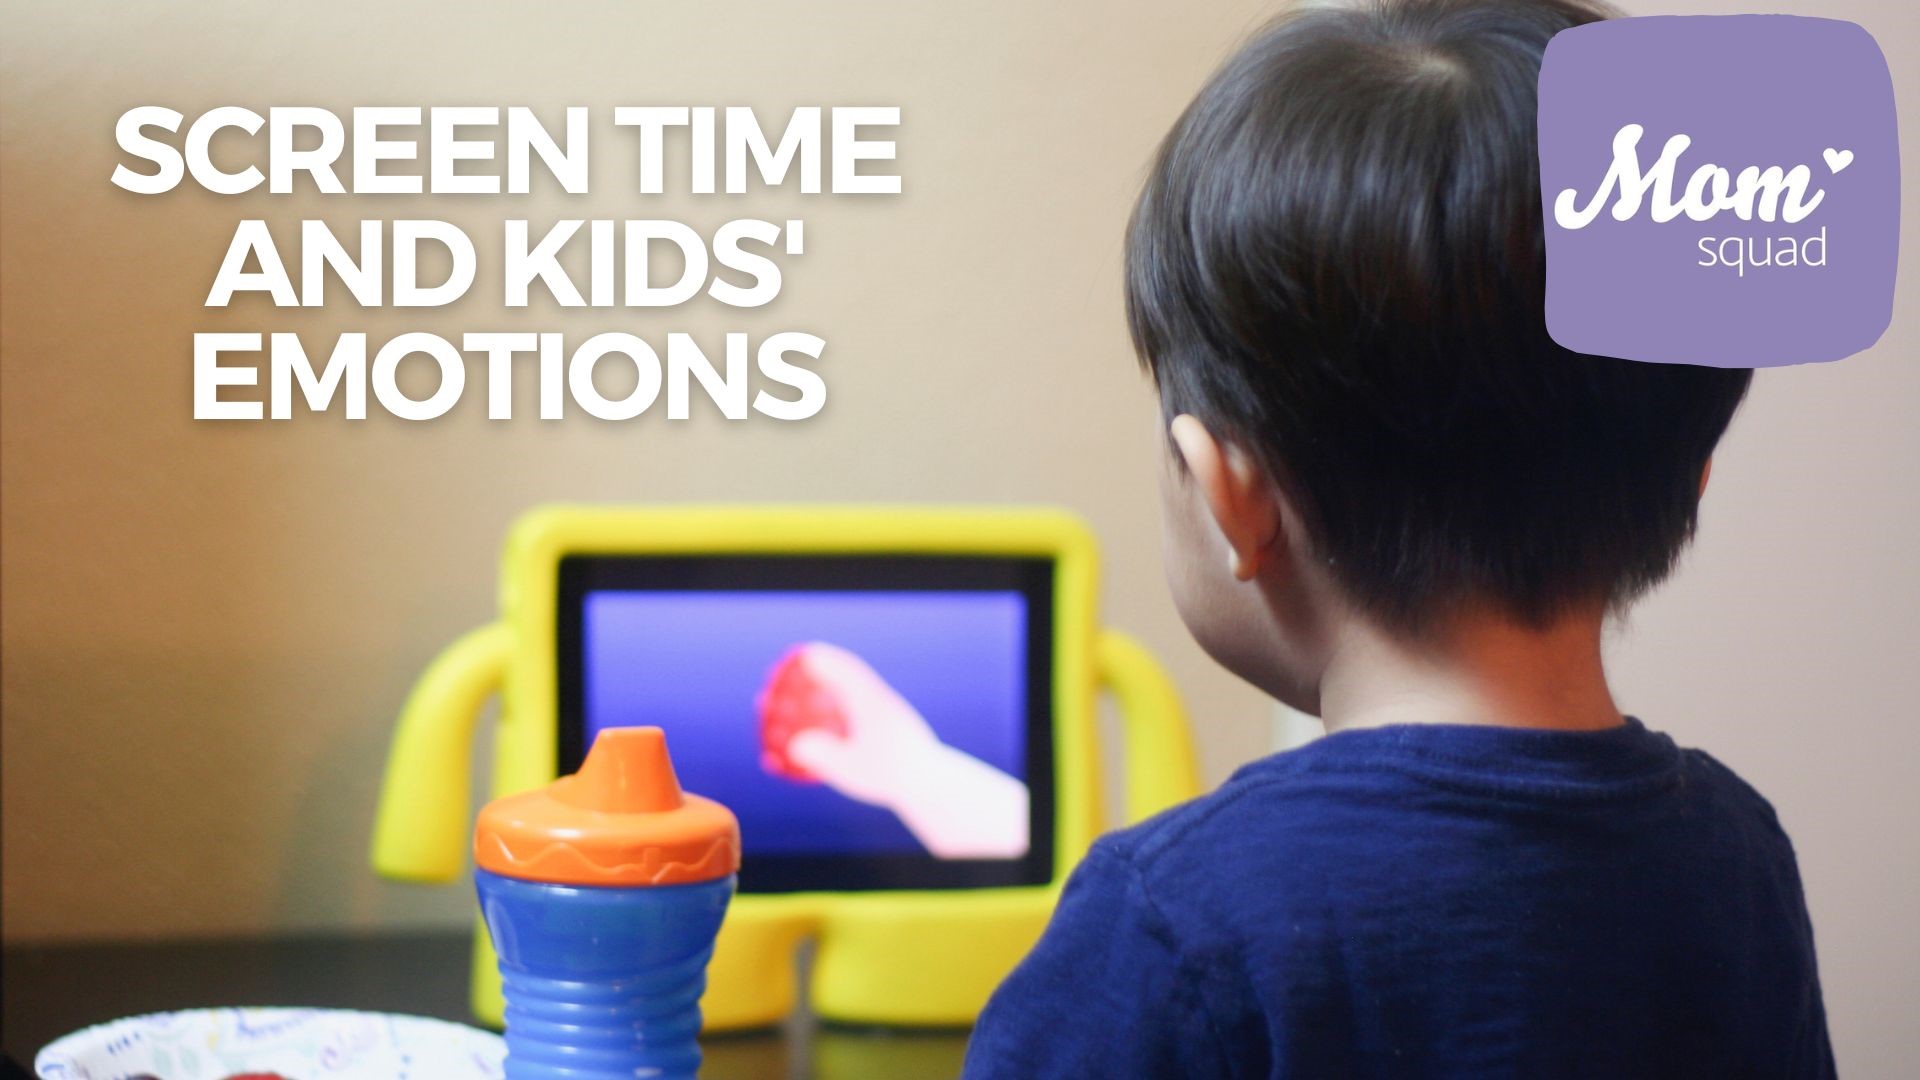 Maureen Kyle discusses screen time for kids with Dr. Michael Manos from the Cleveland Clinic. How it can lead to emotional dysregulation and ways to combat it.